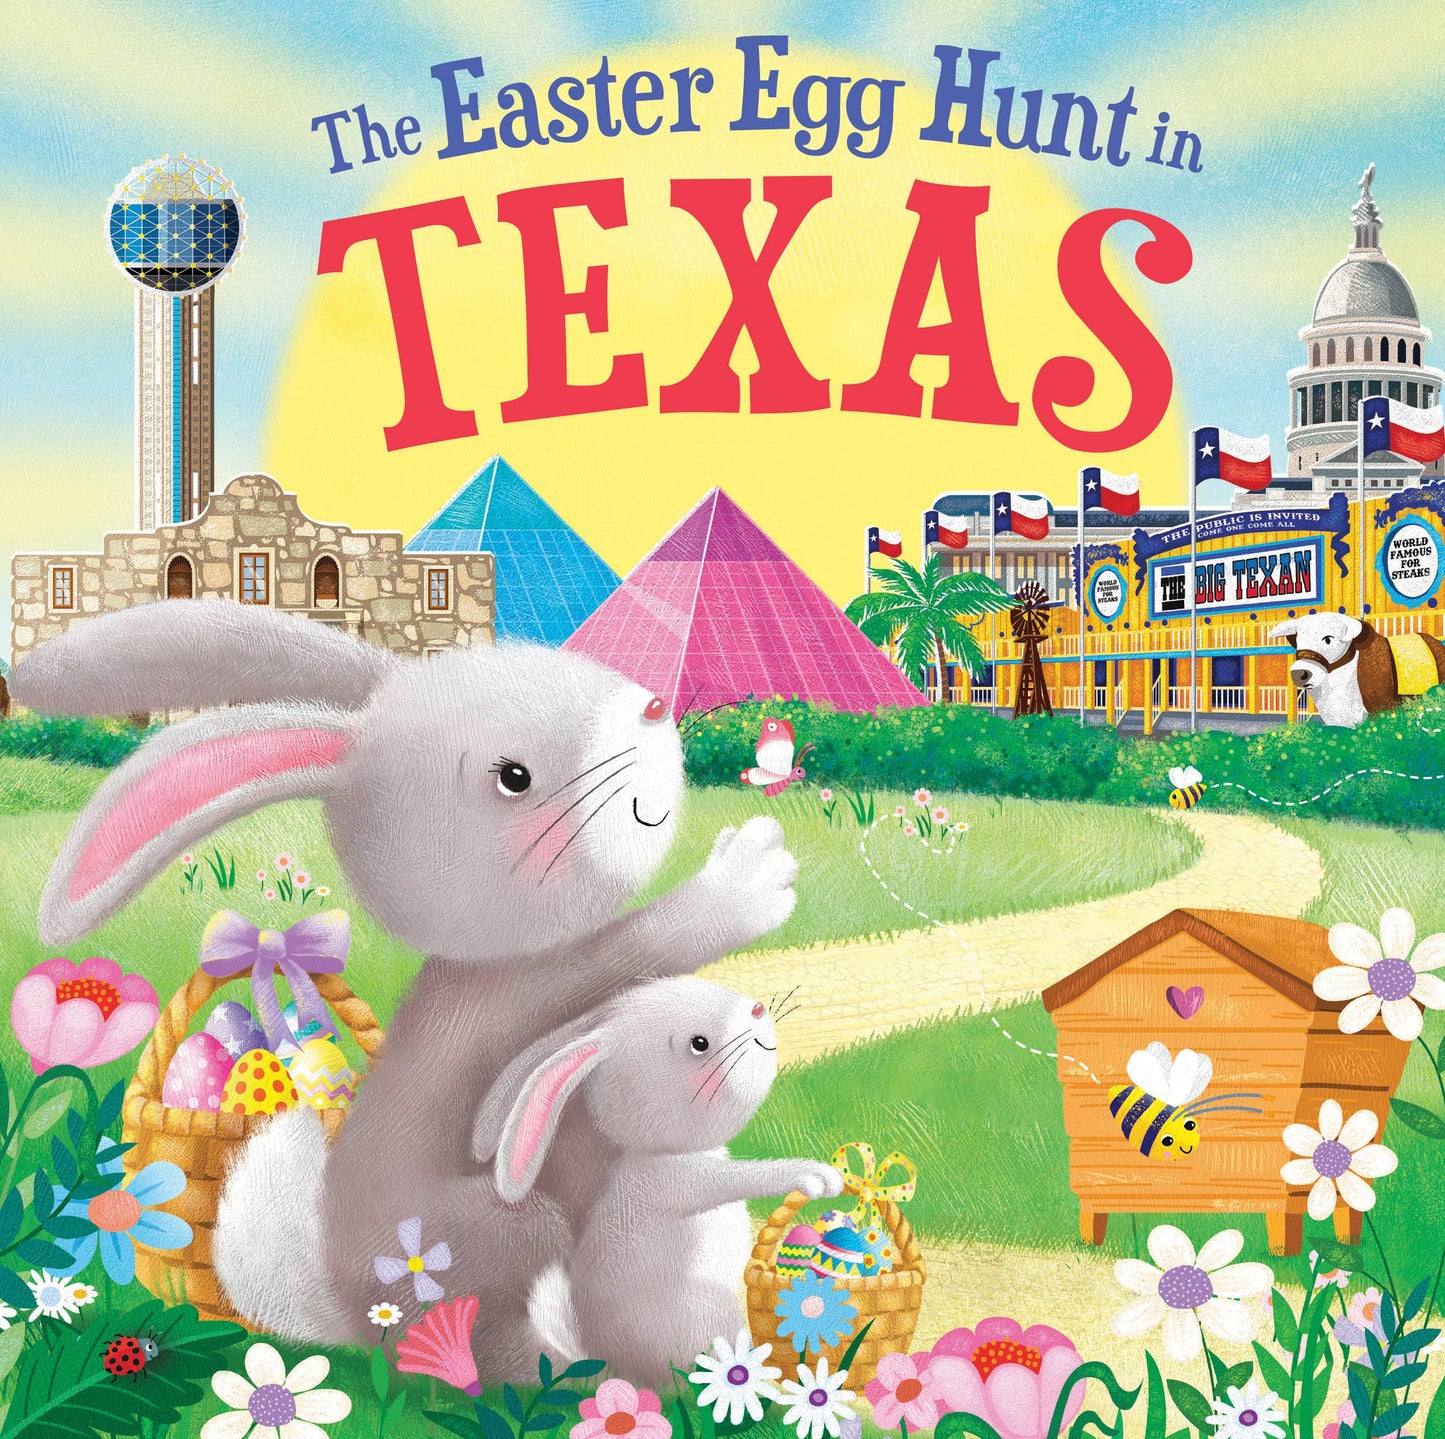 The Easter Egg Hunt in Texas